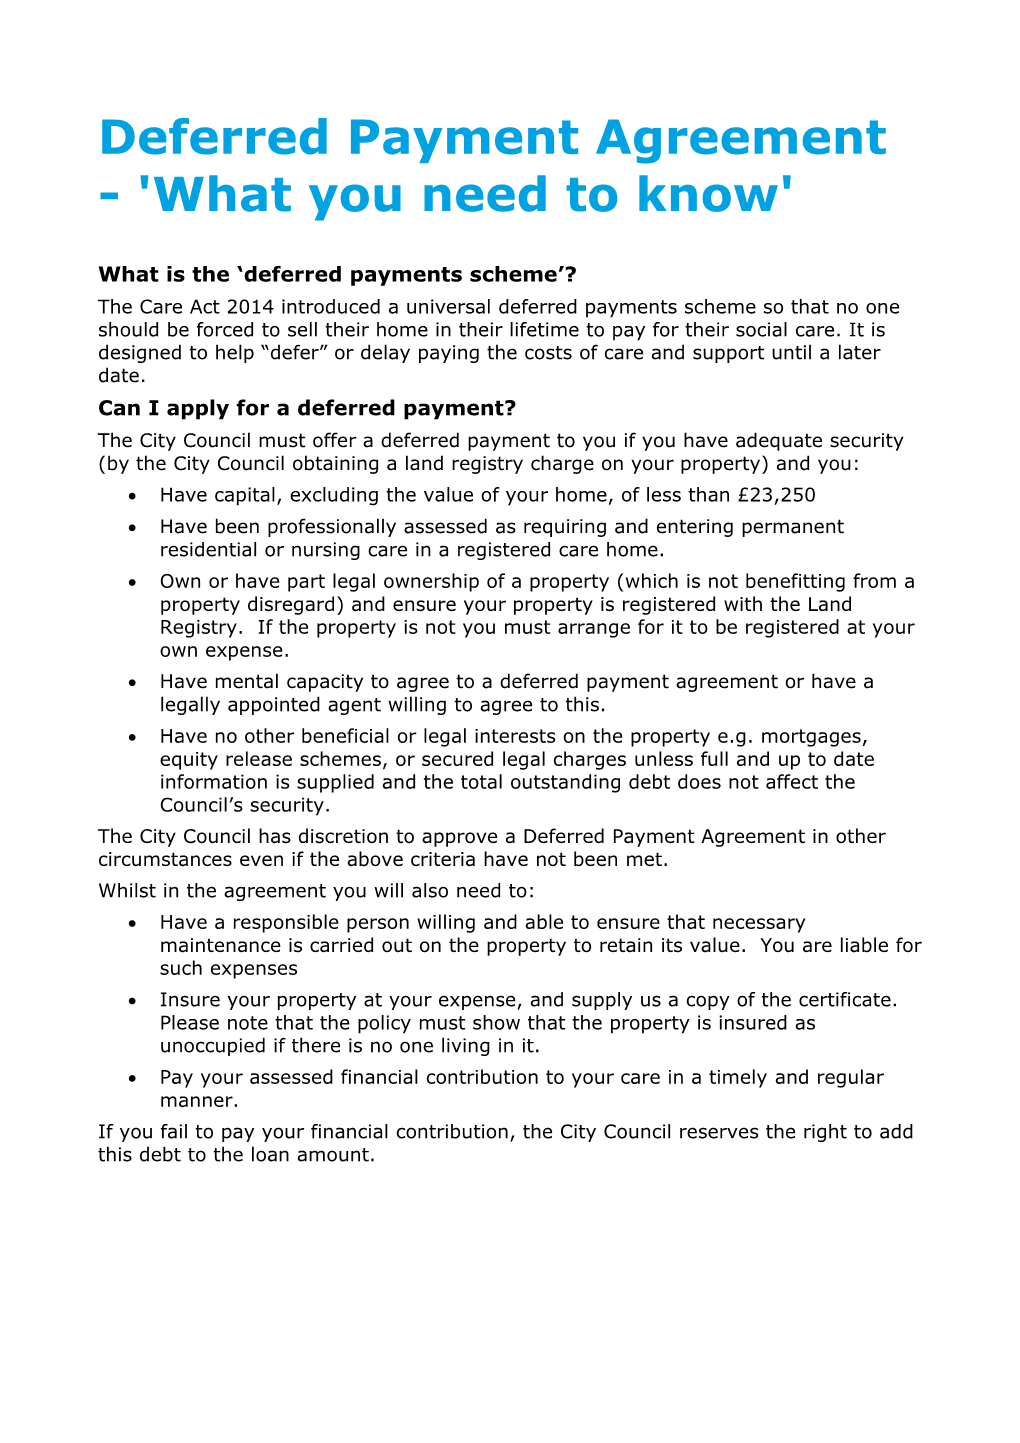 Deferred Payment Agreement - 'What You Need to Know'